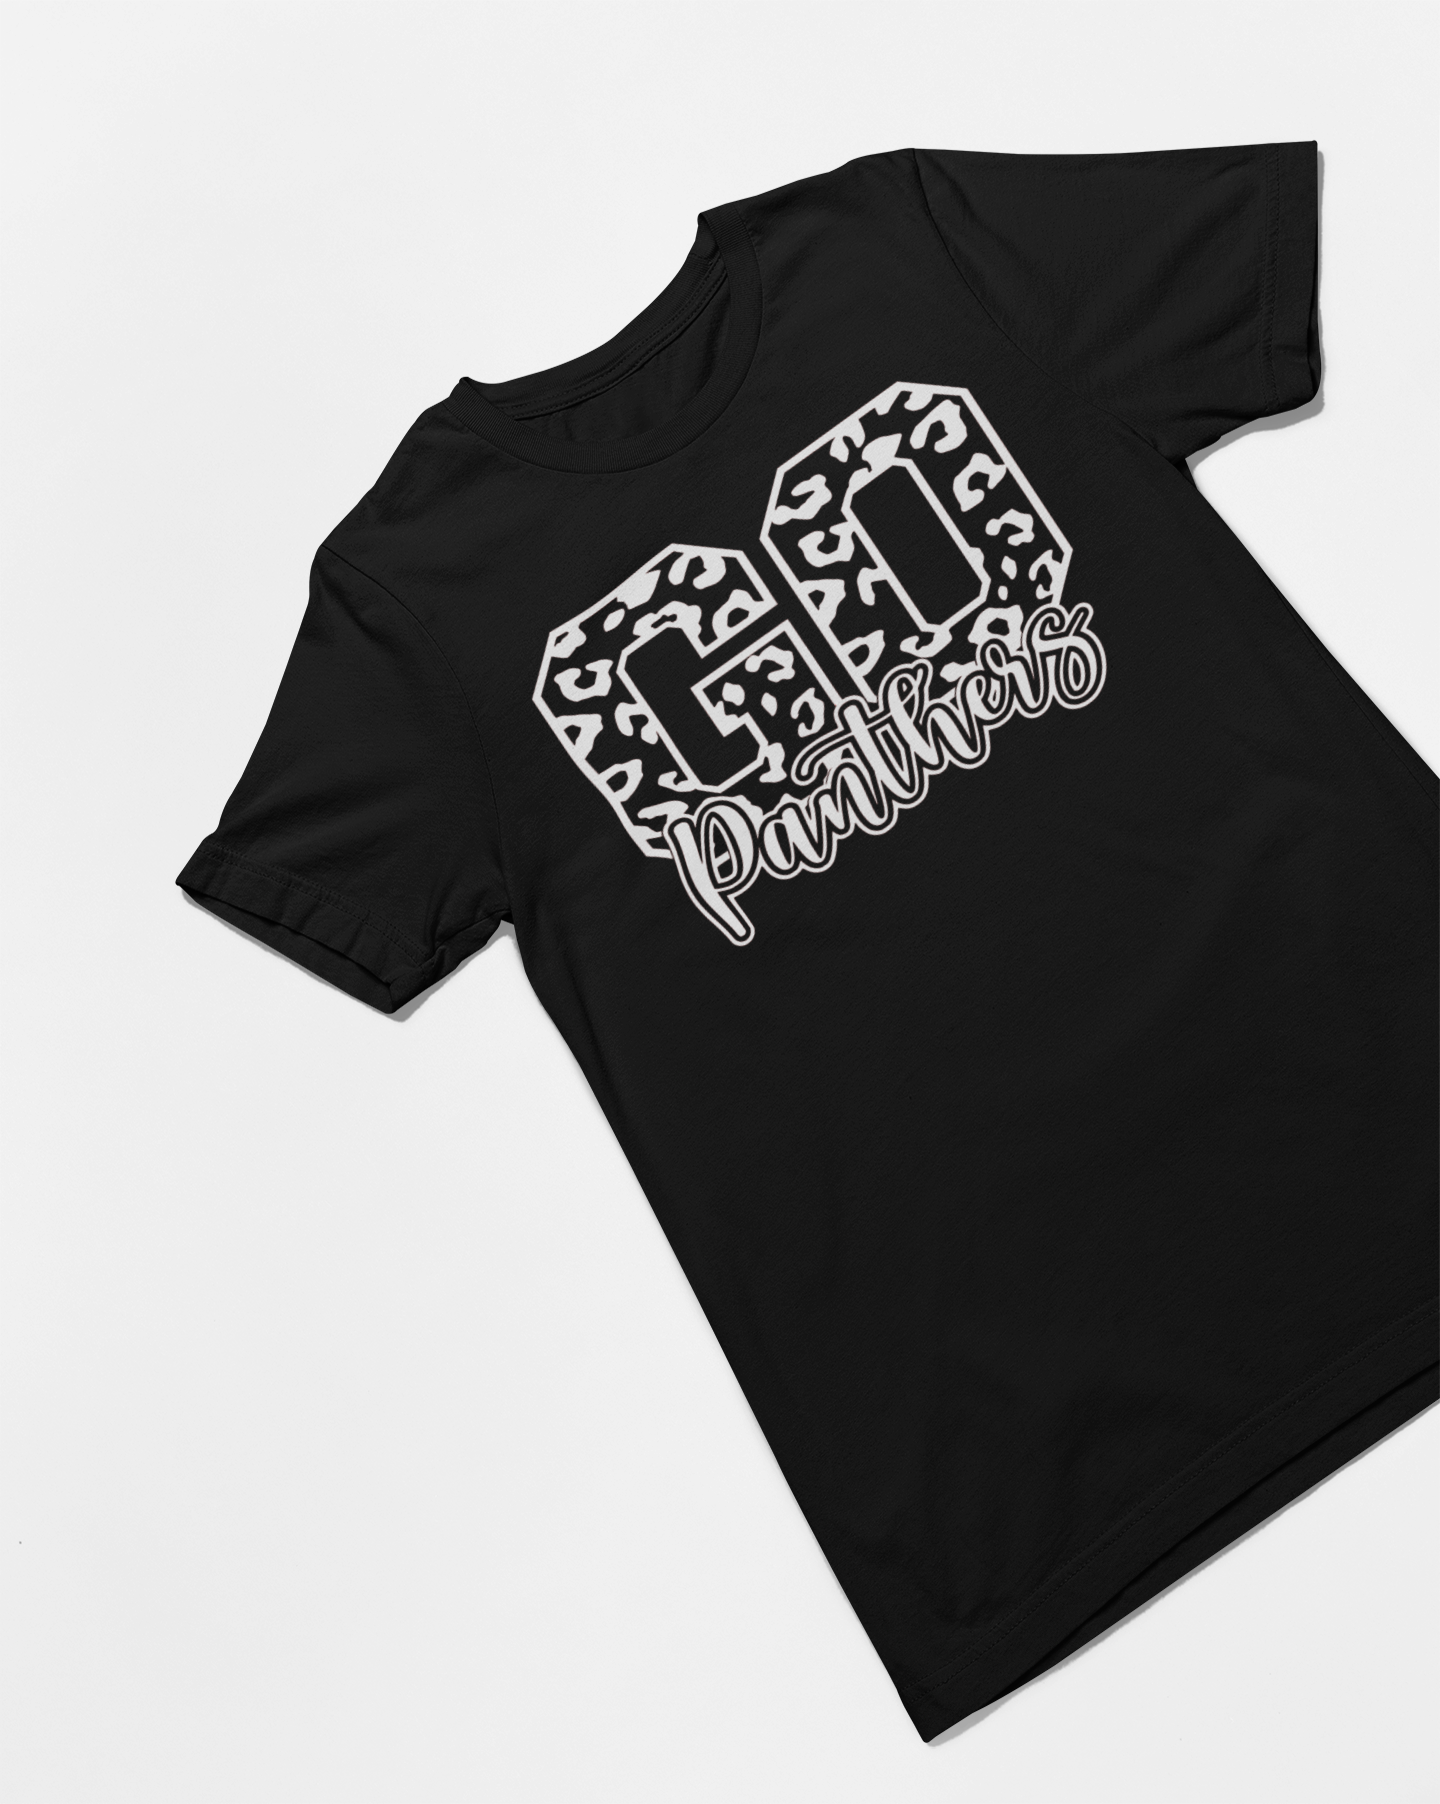 Go (Your Team Here) Tshirt